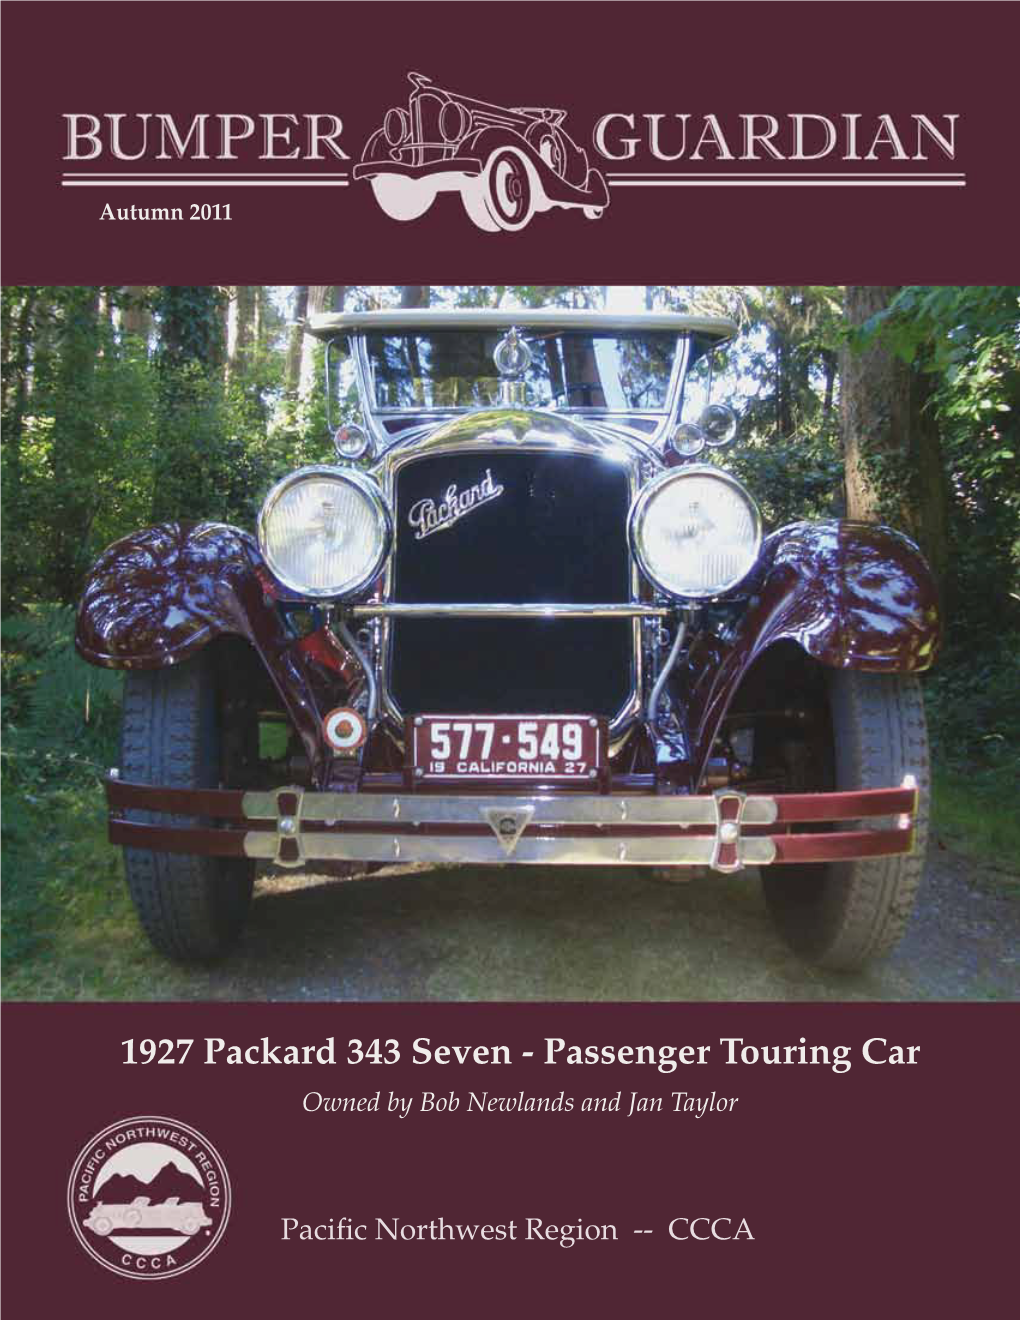 1927 Packard 343 Seven - Passenger Touring Car Owned by Bob Newlands and Jan Taylor